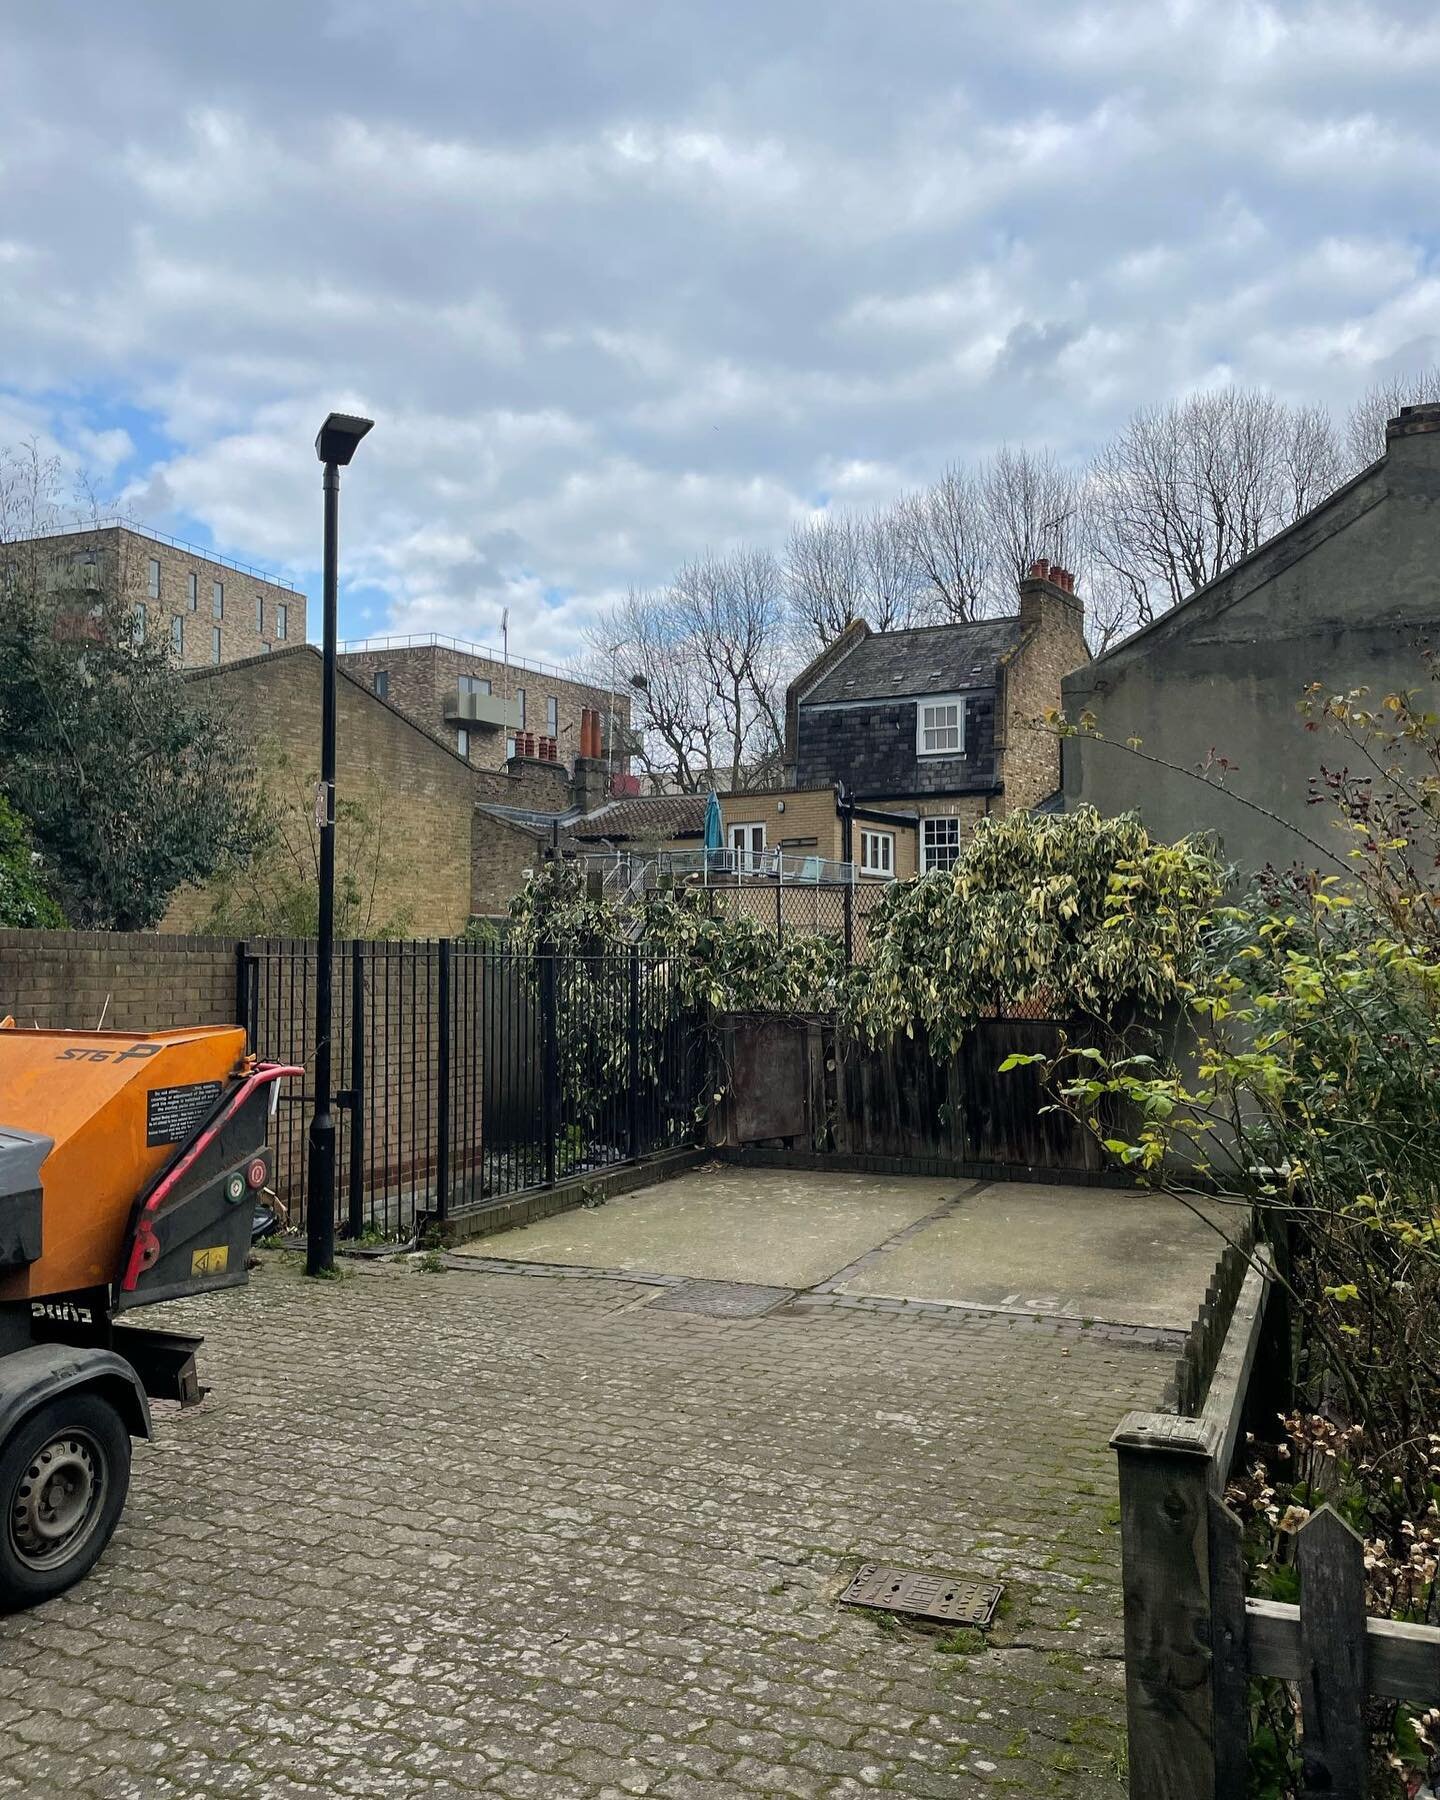 The mighty Sycamore has fallen, giving way to a breath of fresh space in Mile End! 🌳➡️🌿 Swipe to see what he site looked like before tree removal. Chigwell Tree Services &ndash; where nature meets nurture. Got trees that need tending? We're just a 